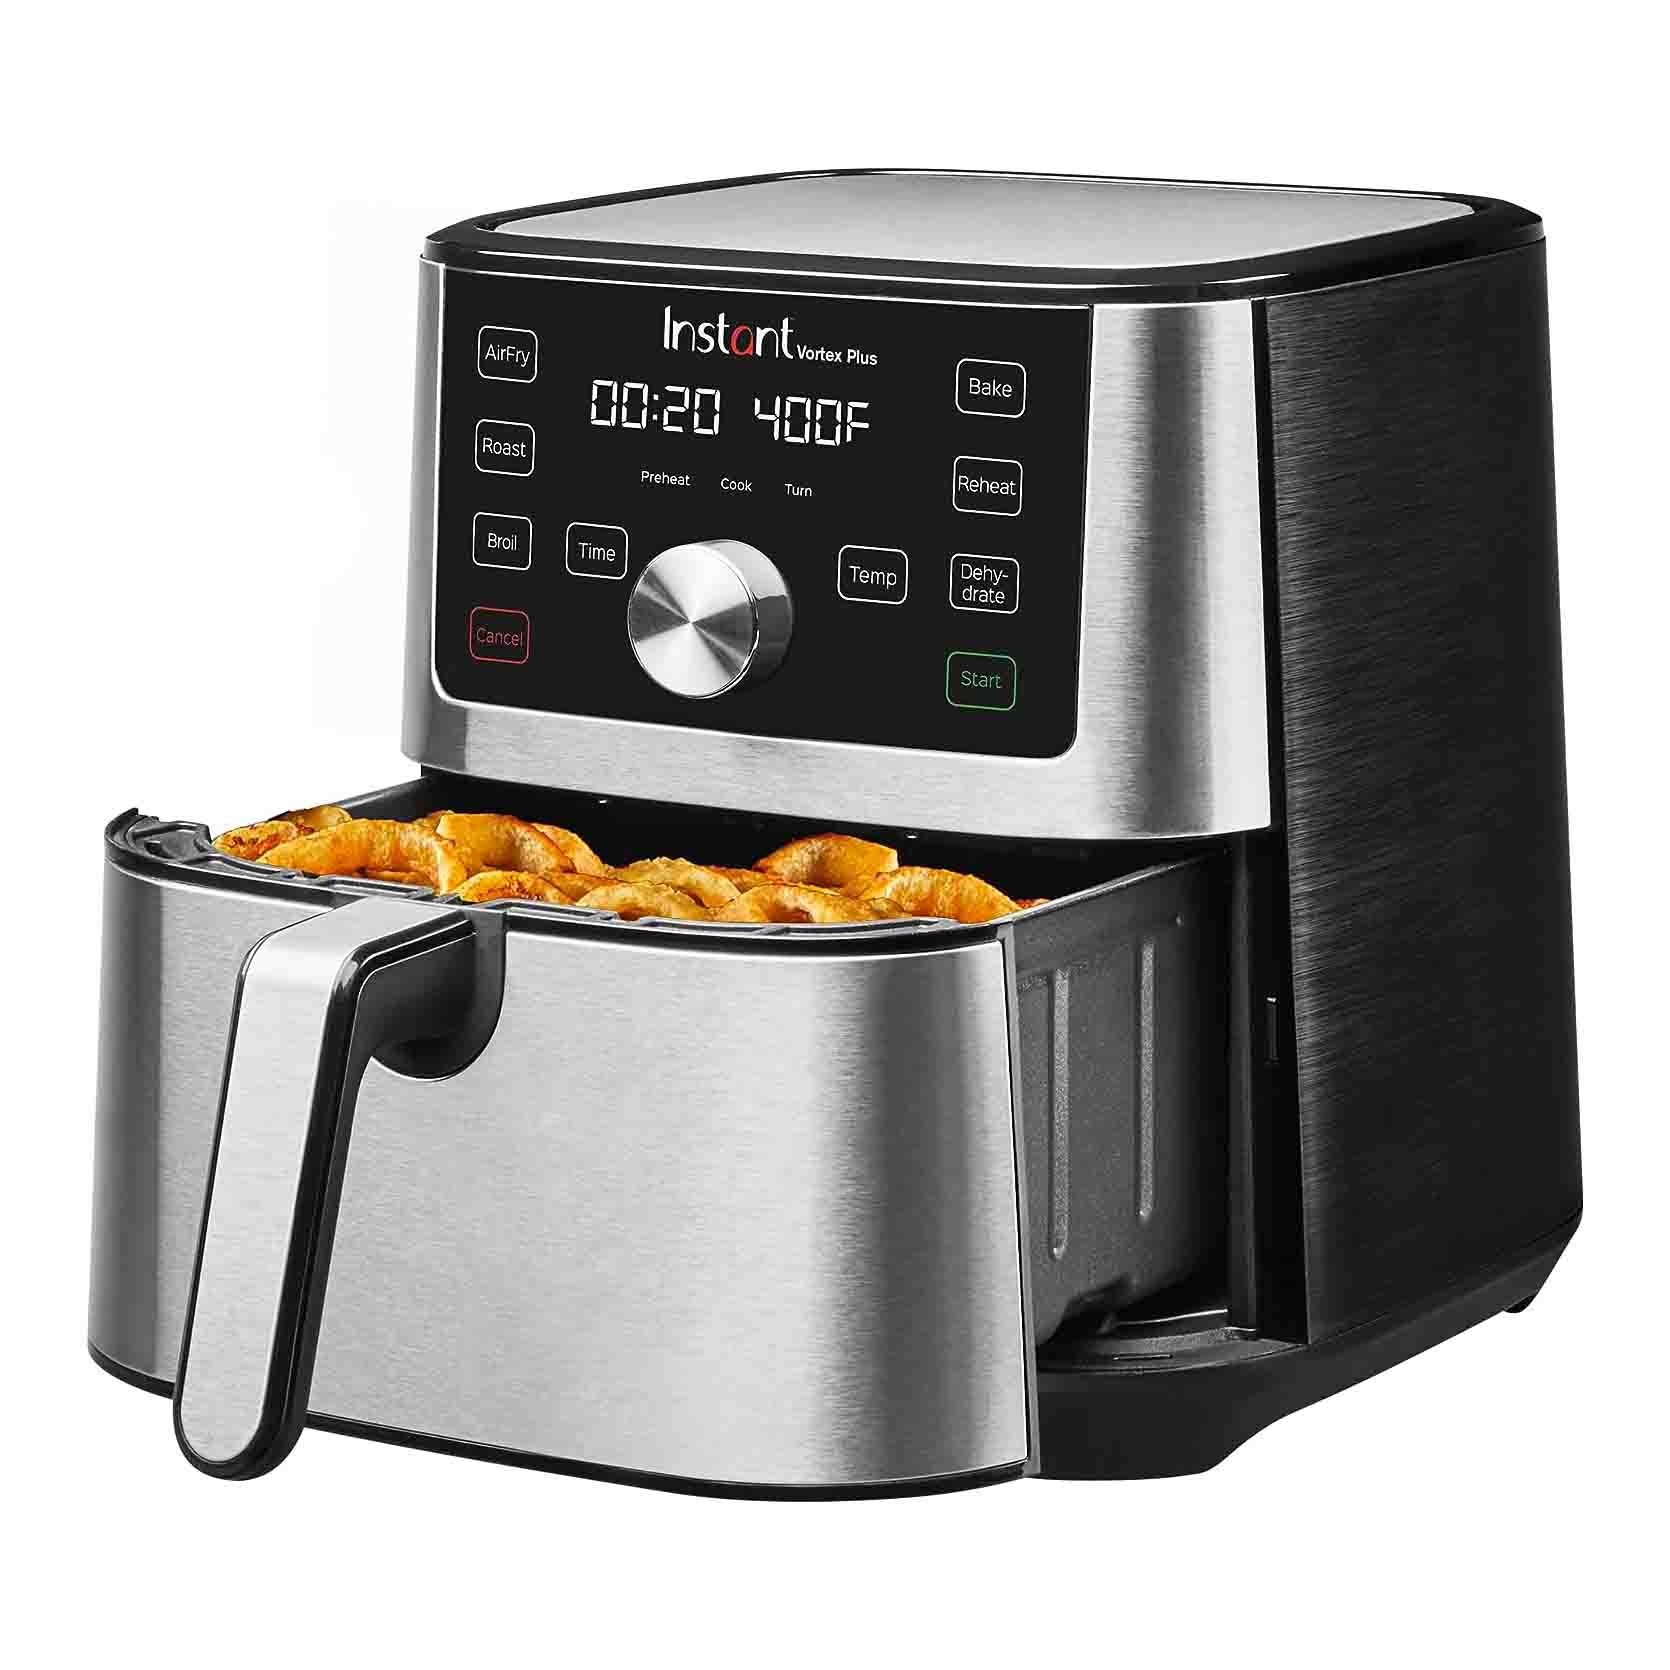 Instant Pot Vortex Plus 6-in-1 4QT Air Fryer Oven in stainless steel with removable basket